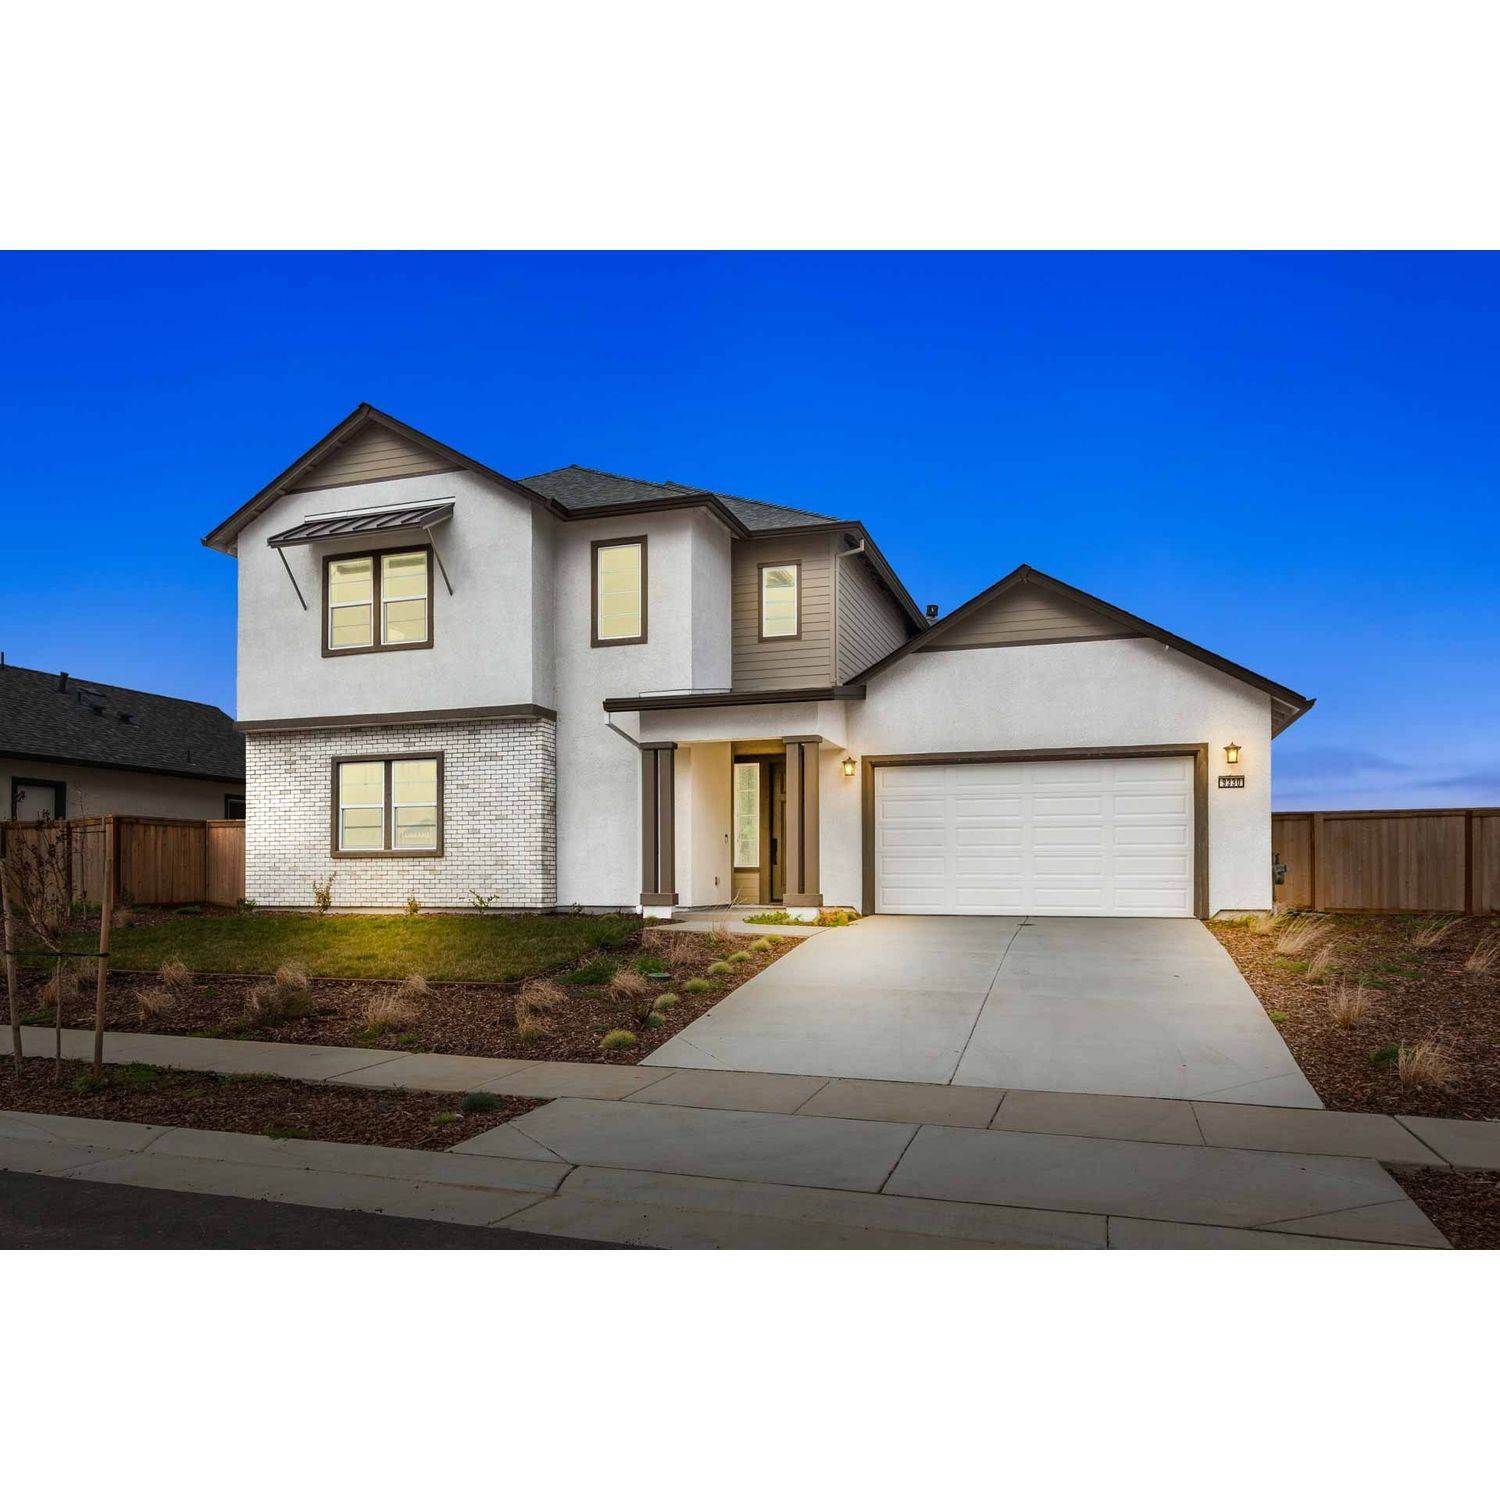 11. Homestead at Mason Trails building at 9450 Mirabelle St, Roseville, CA 95747